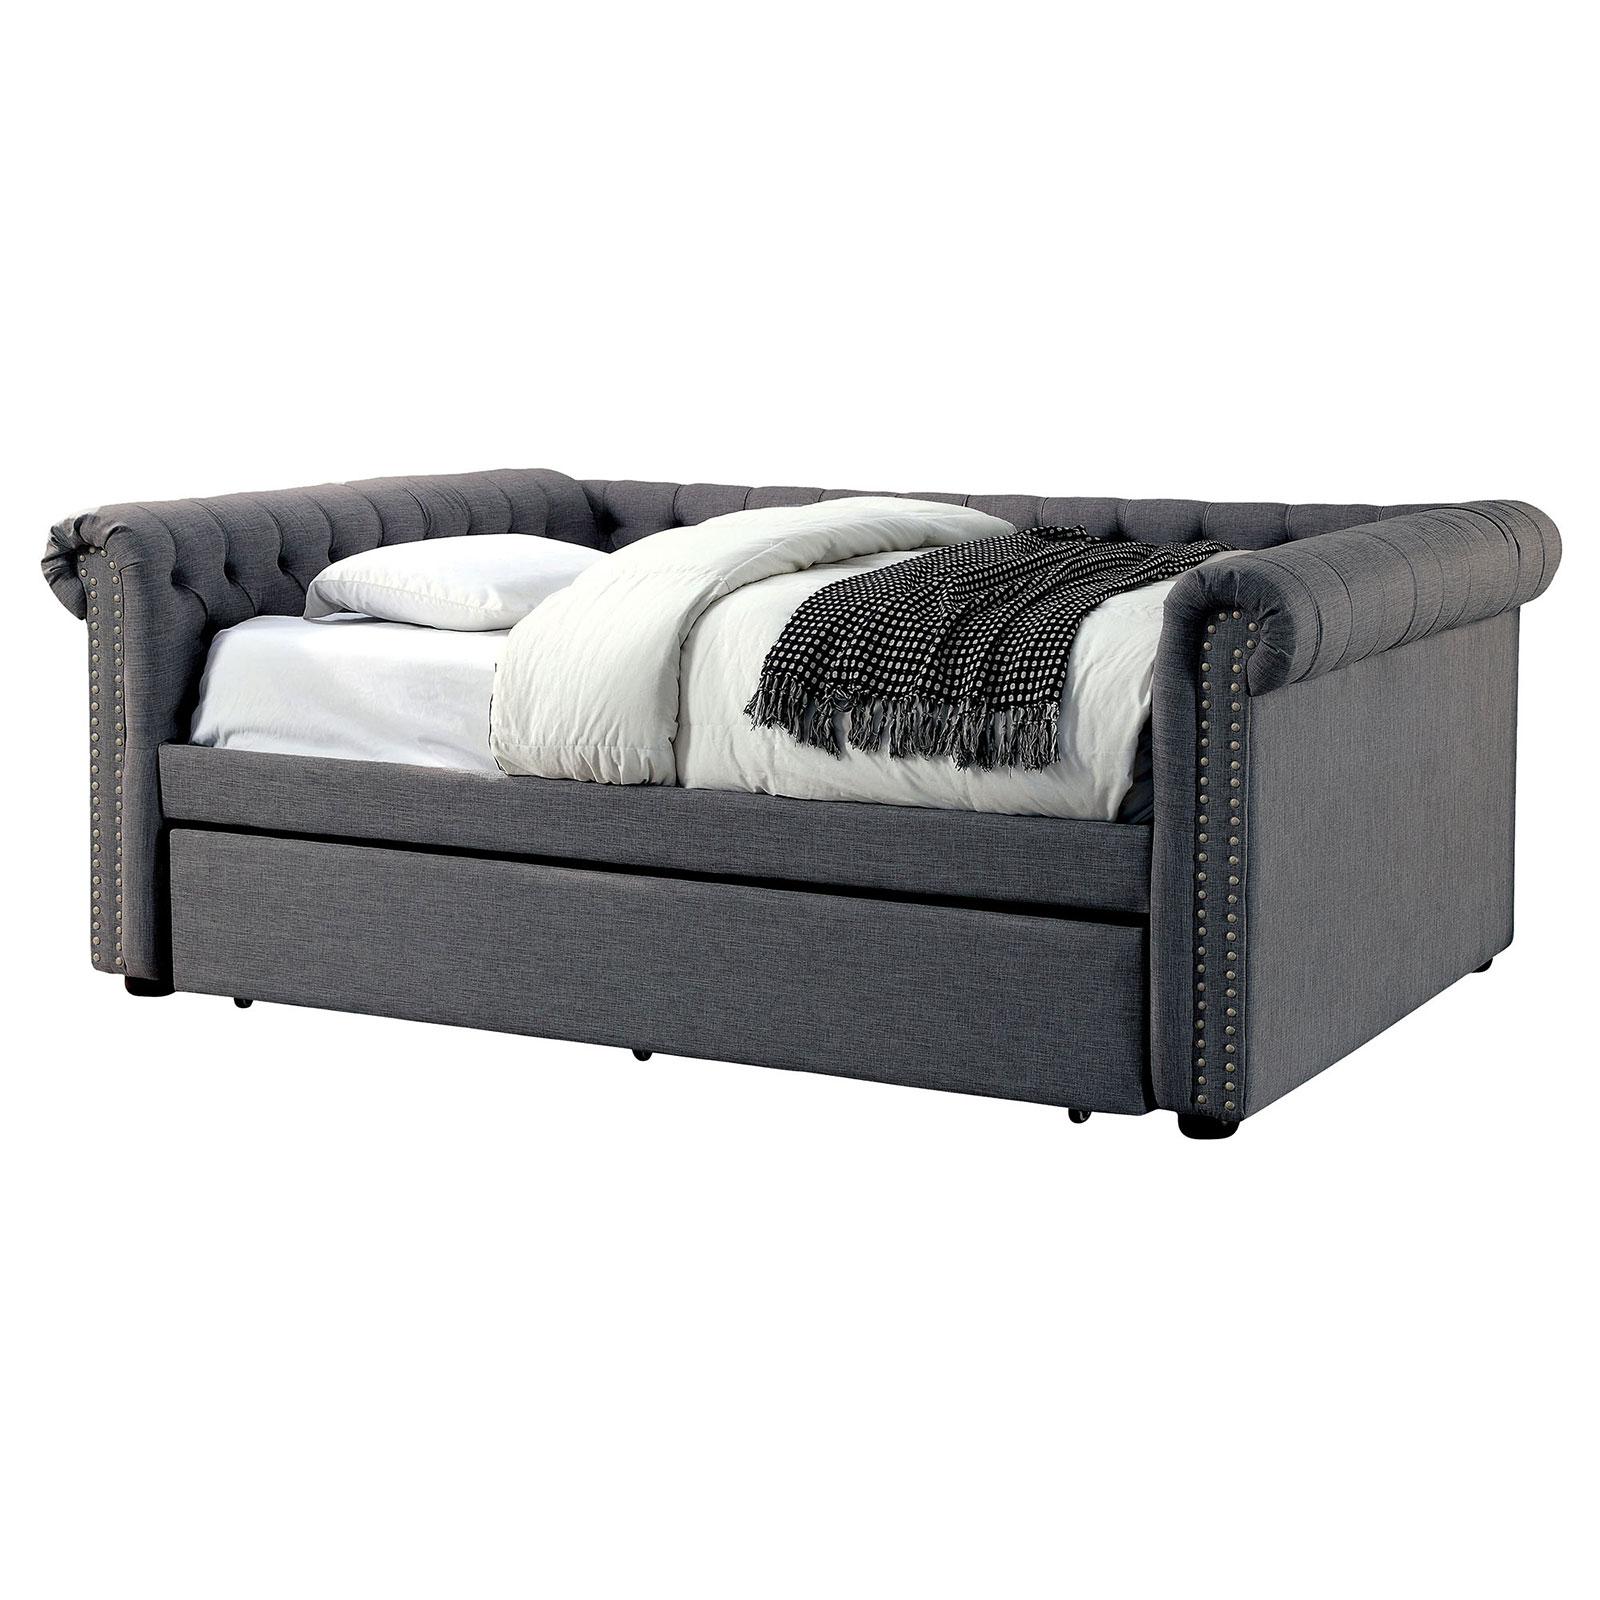 Contemporary Daybed LEANNA CM1027GY-BED-T CM1027GY-BED-T in Gray Fabric